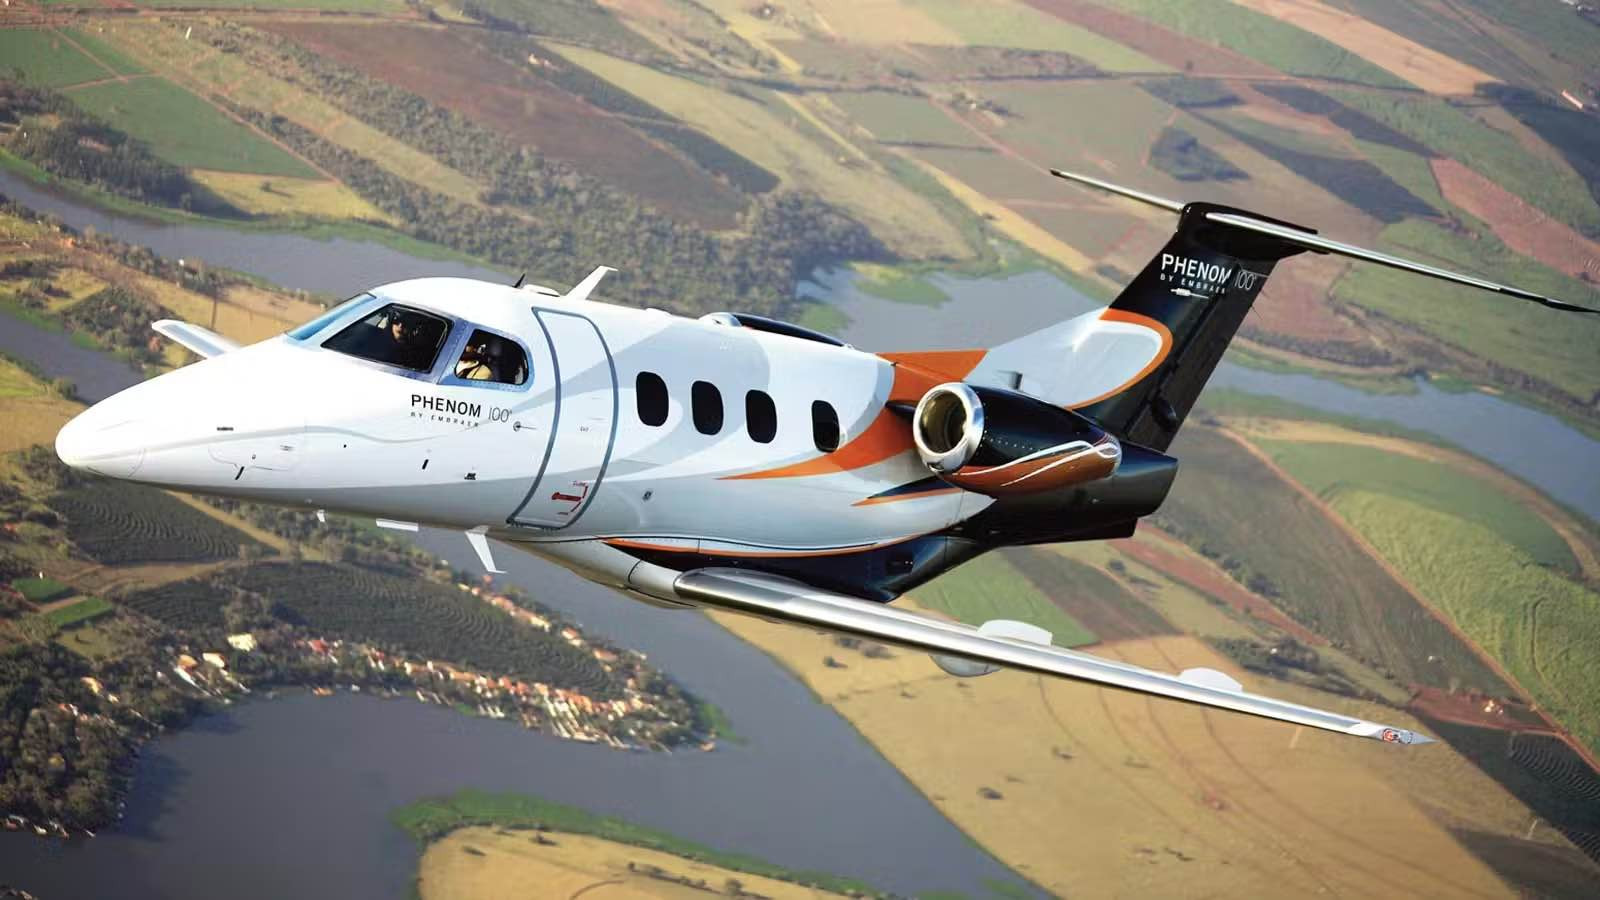 History of the Embraer Phenom 100